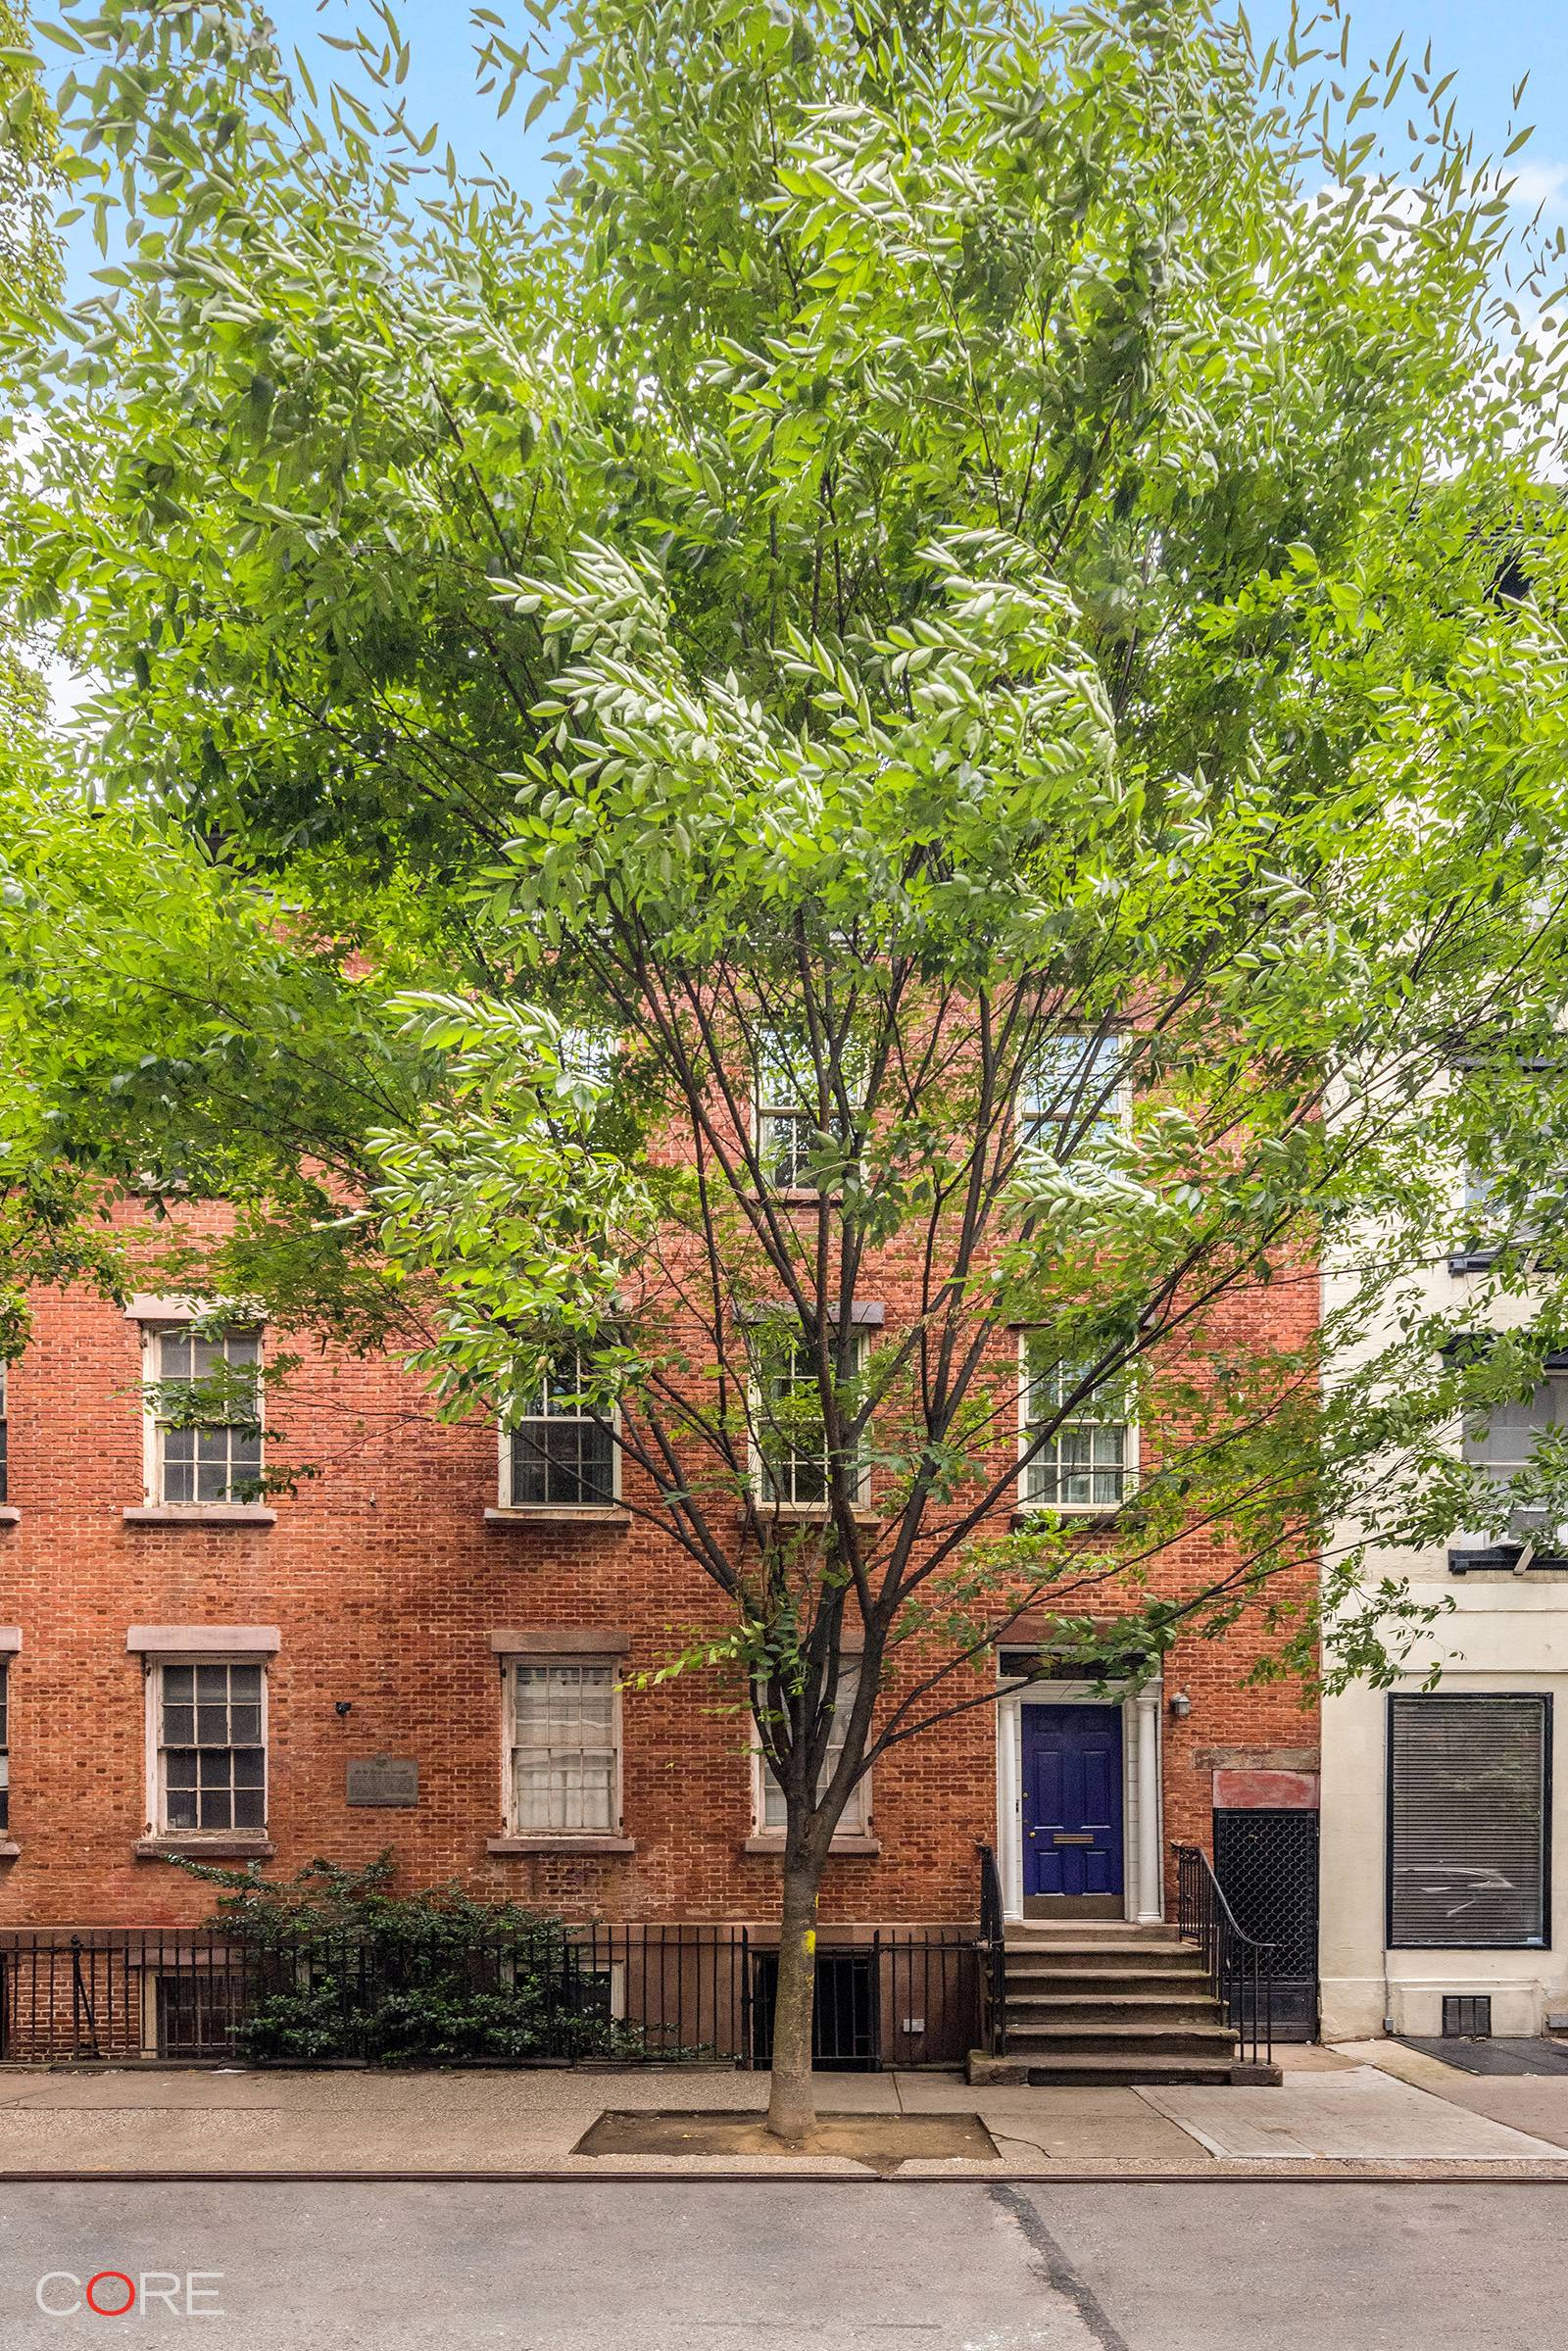 Welcome home to 83 Sullivan Street, a unique opportunity to live in a historic, federal style townhouse filled with old century details and charm.